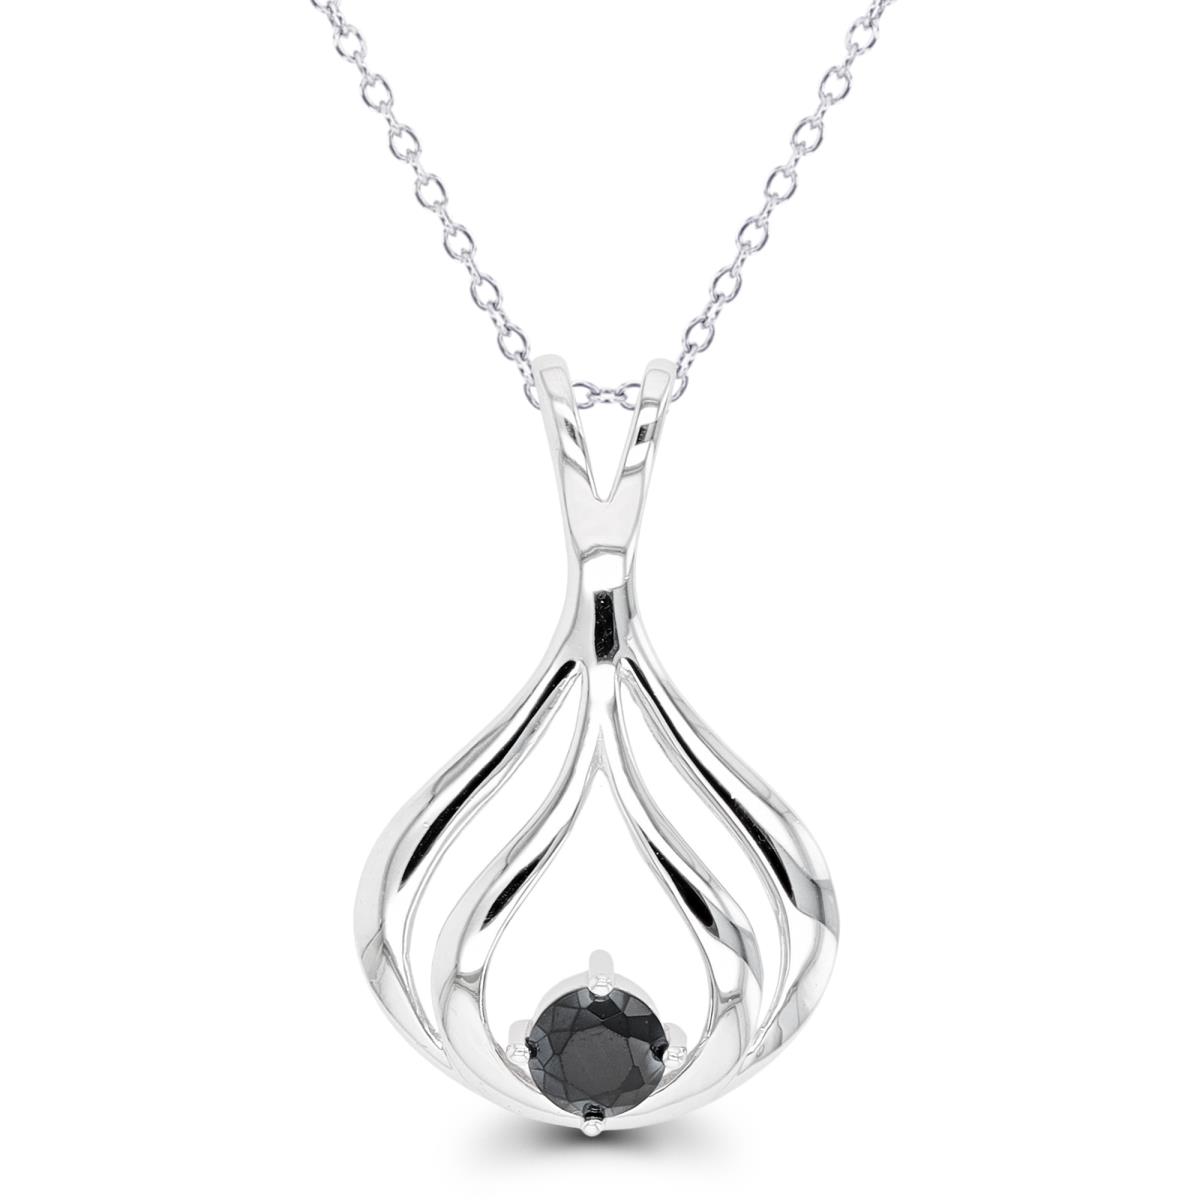 Sterling Silver Rhodium 5mm Rd Black Spinel Teardrop 18"+2" Singapore Necklace